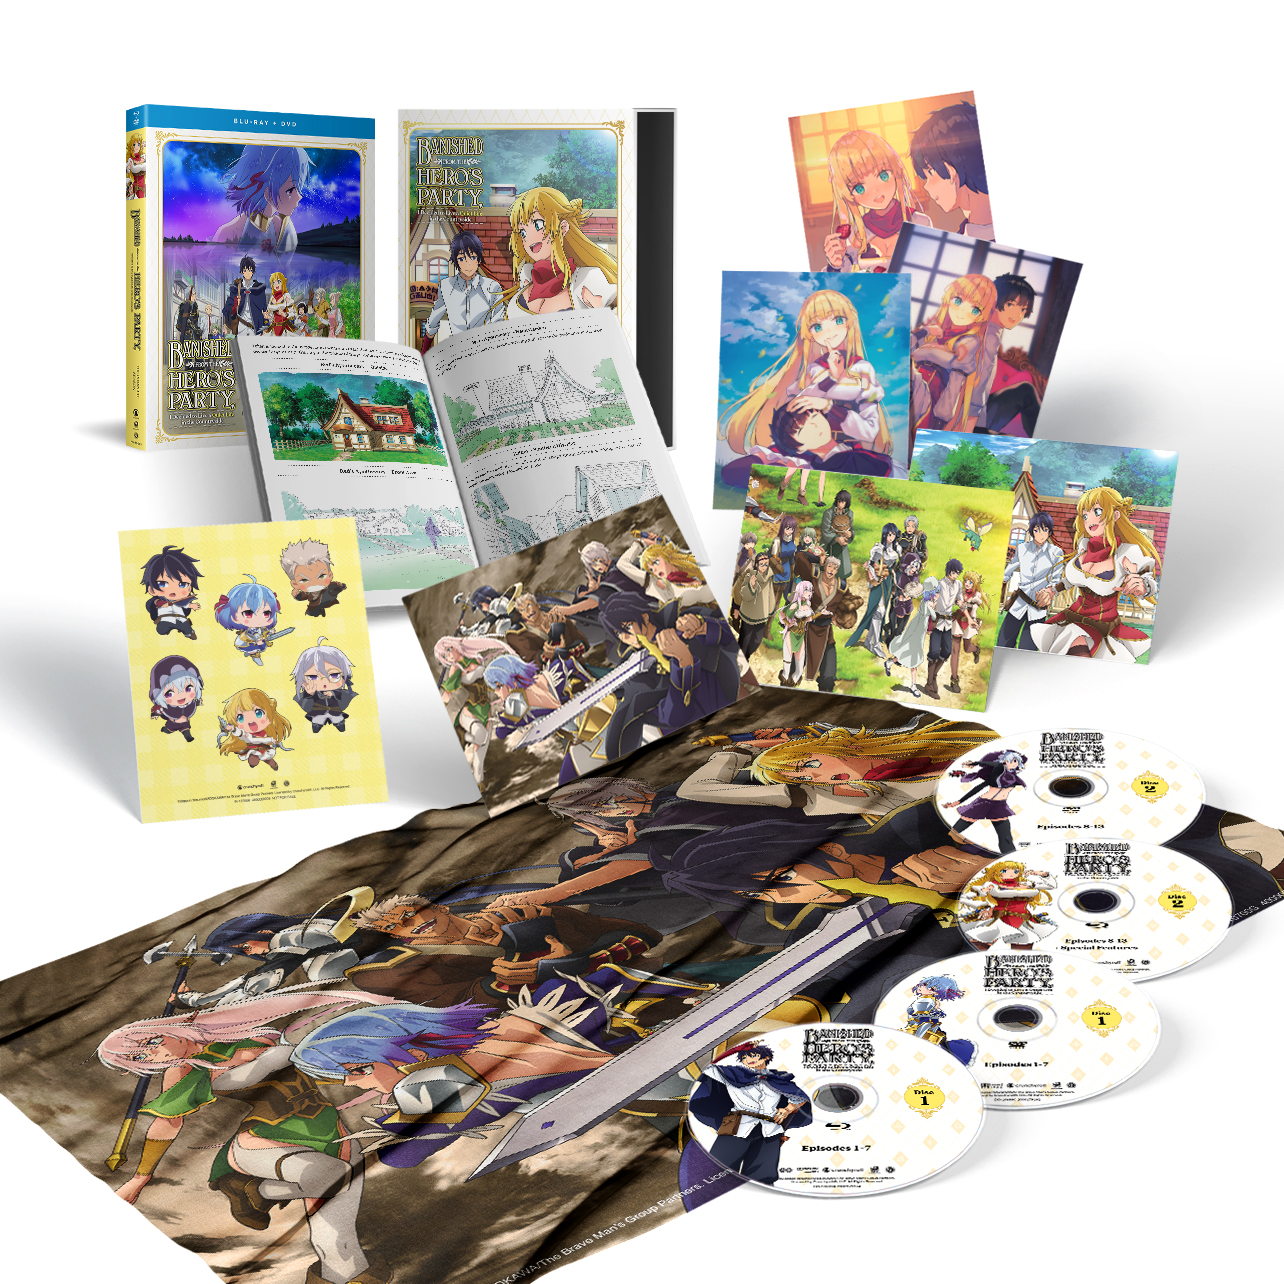 Banished from the Hero's Party I Decided to Live a Quiet Life in the Countryside - The Complete Season - Limited Edition - Blu-ray + DVD image count 0